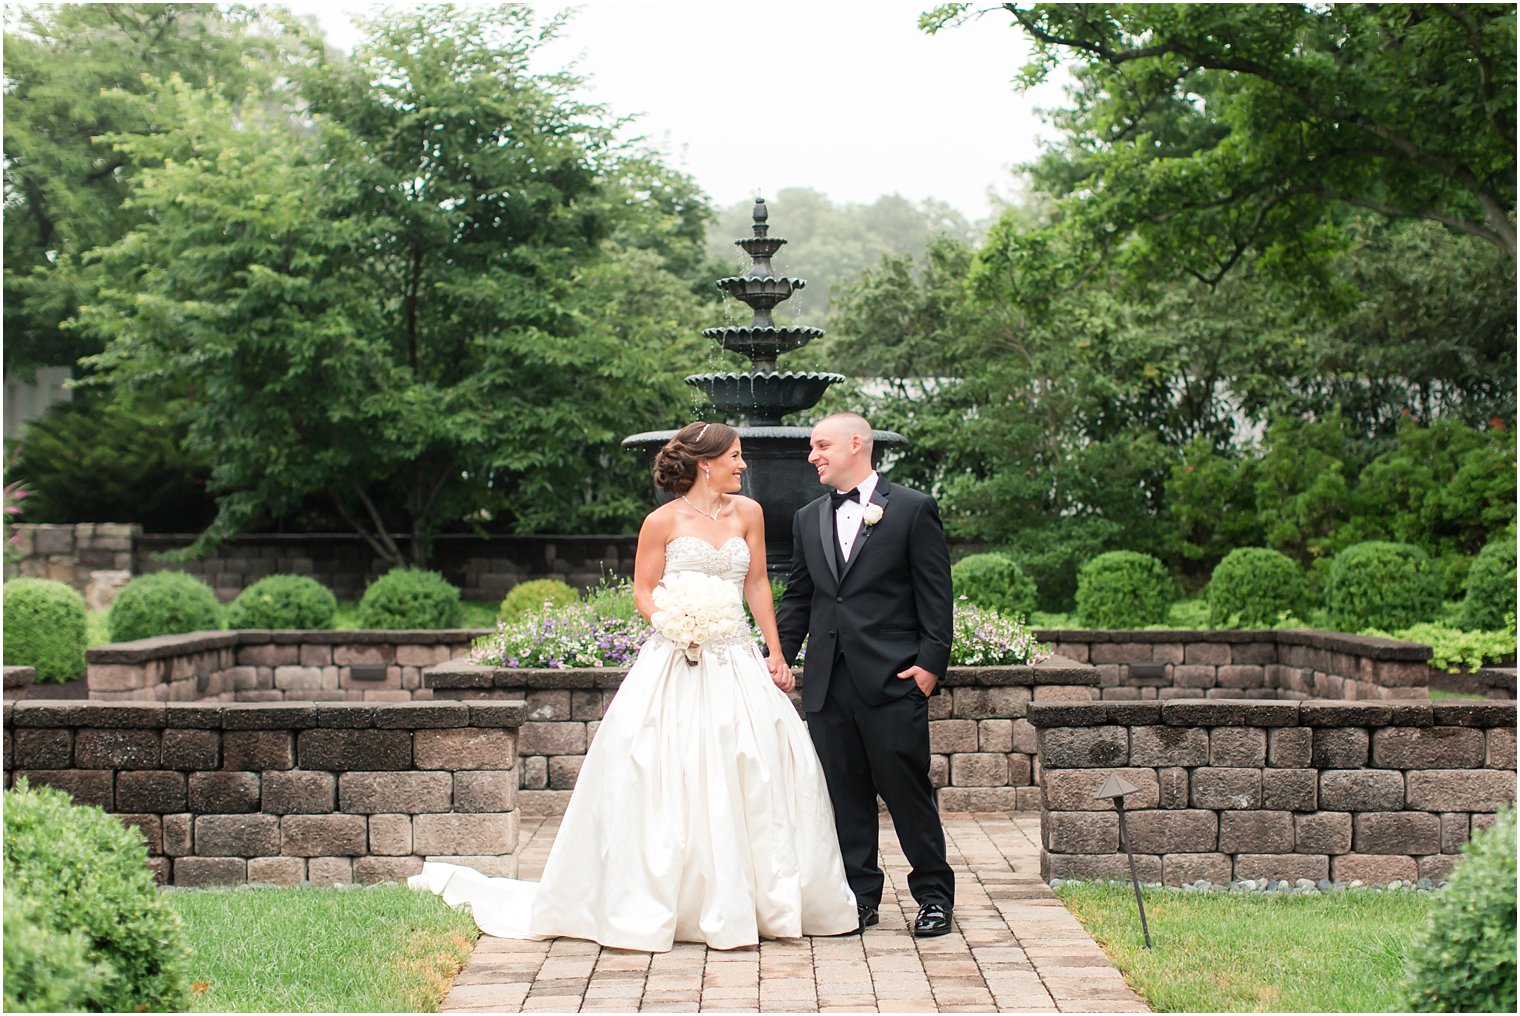 Bride and groom photo at The Farmhouse at the Grand Colonial